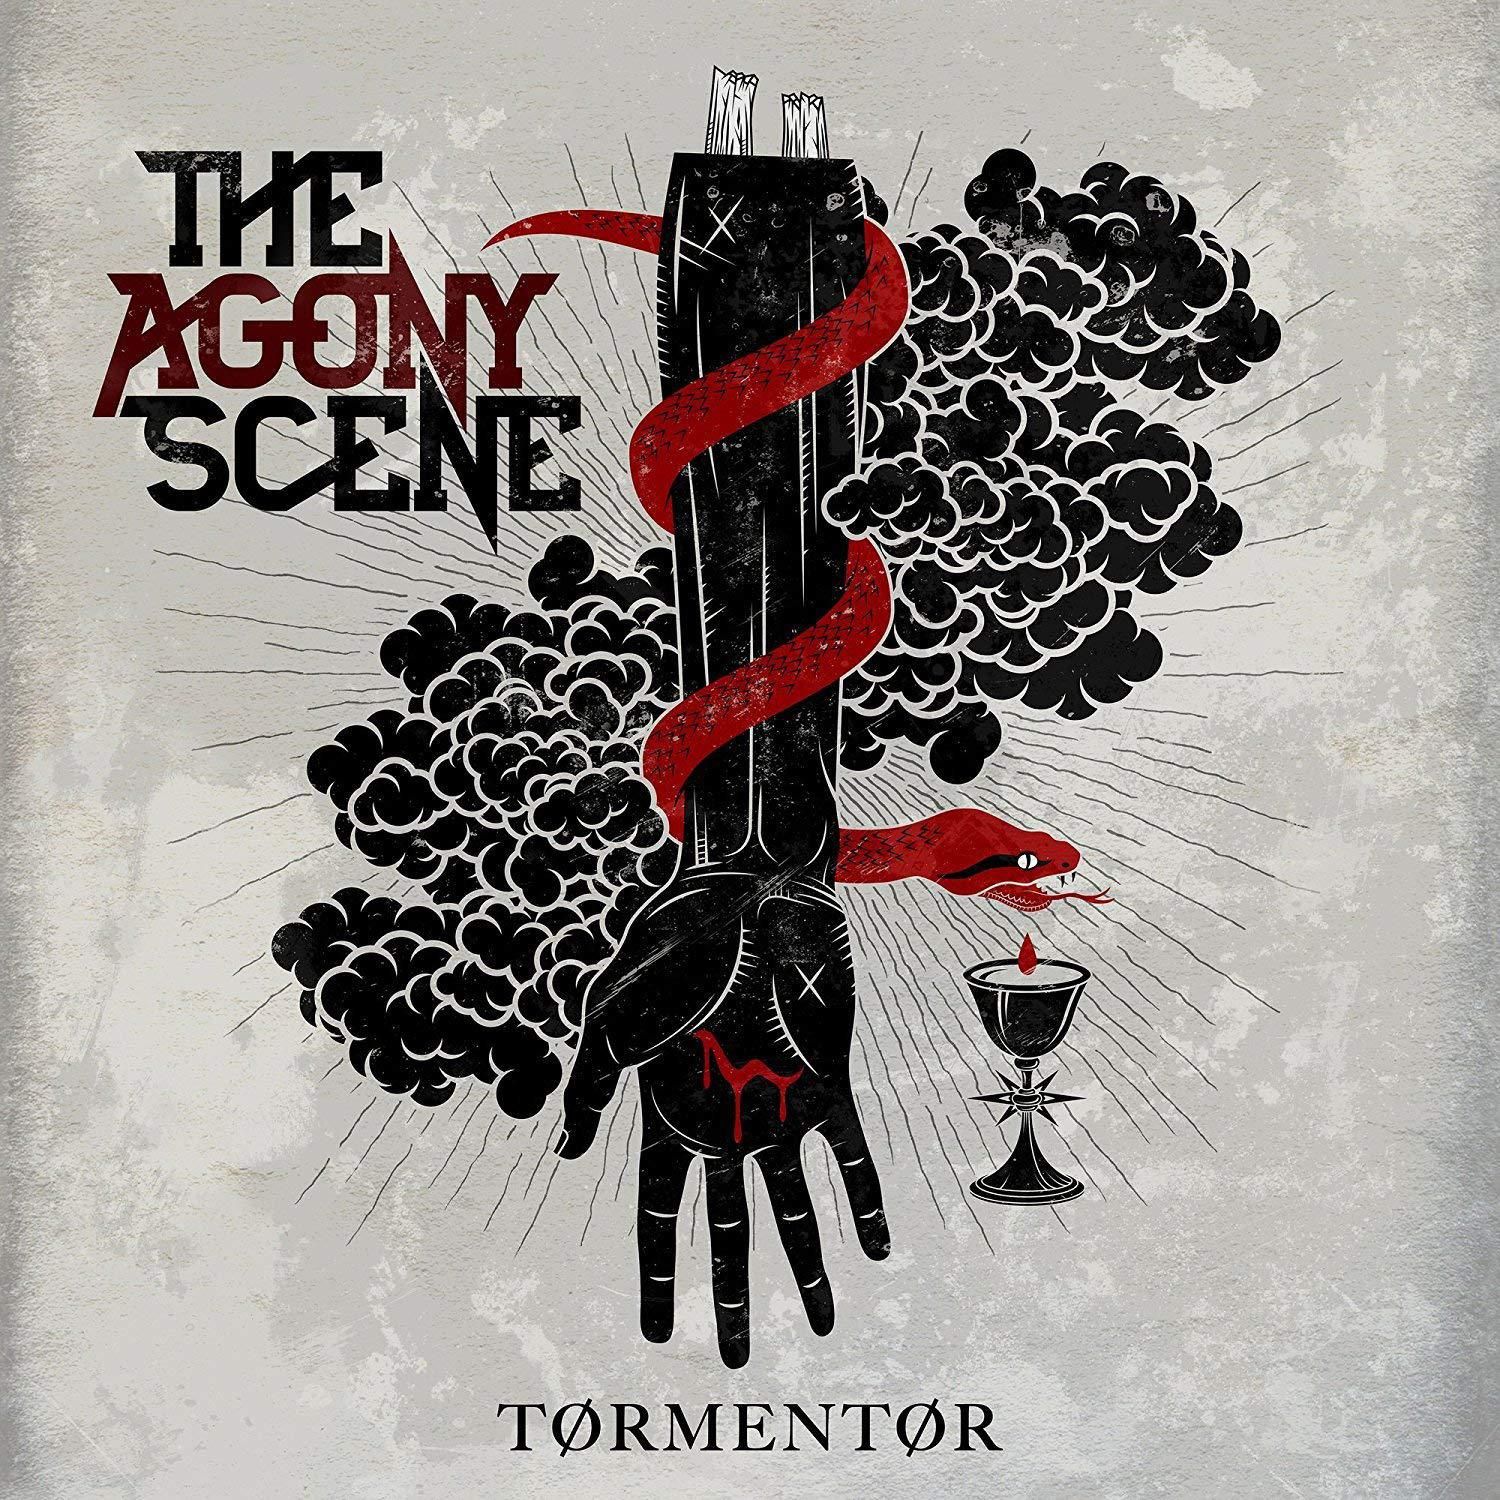 The Agony Scene: 'The Ascent And Decline'-Clip ist online